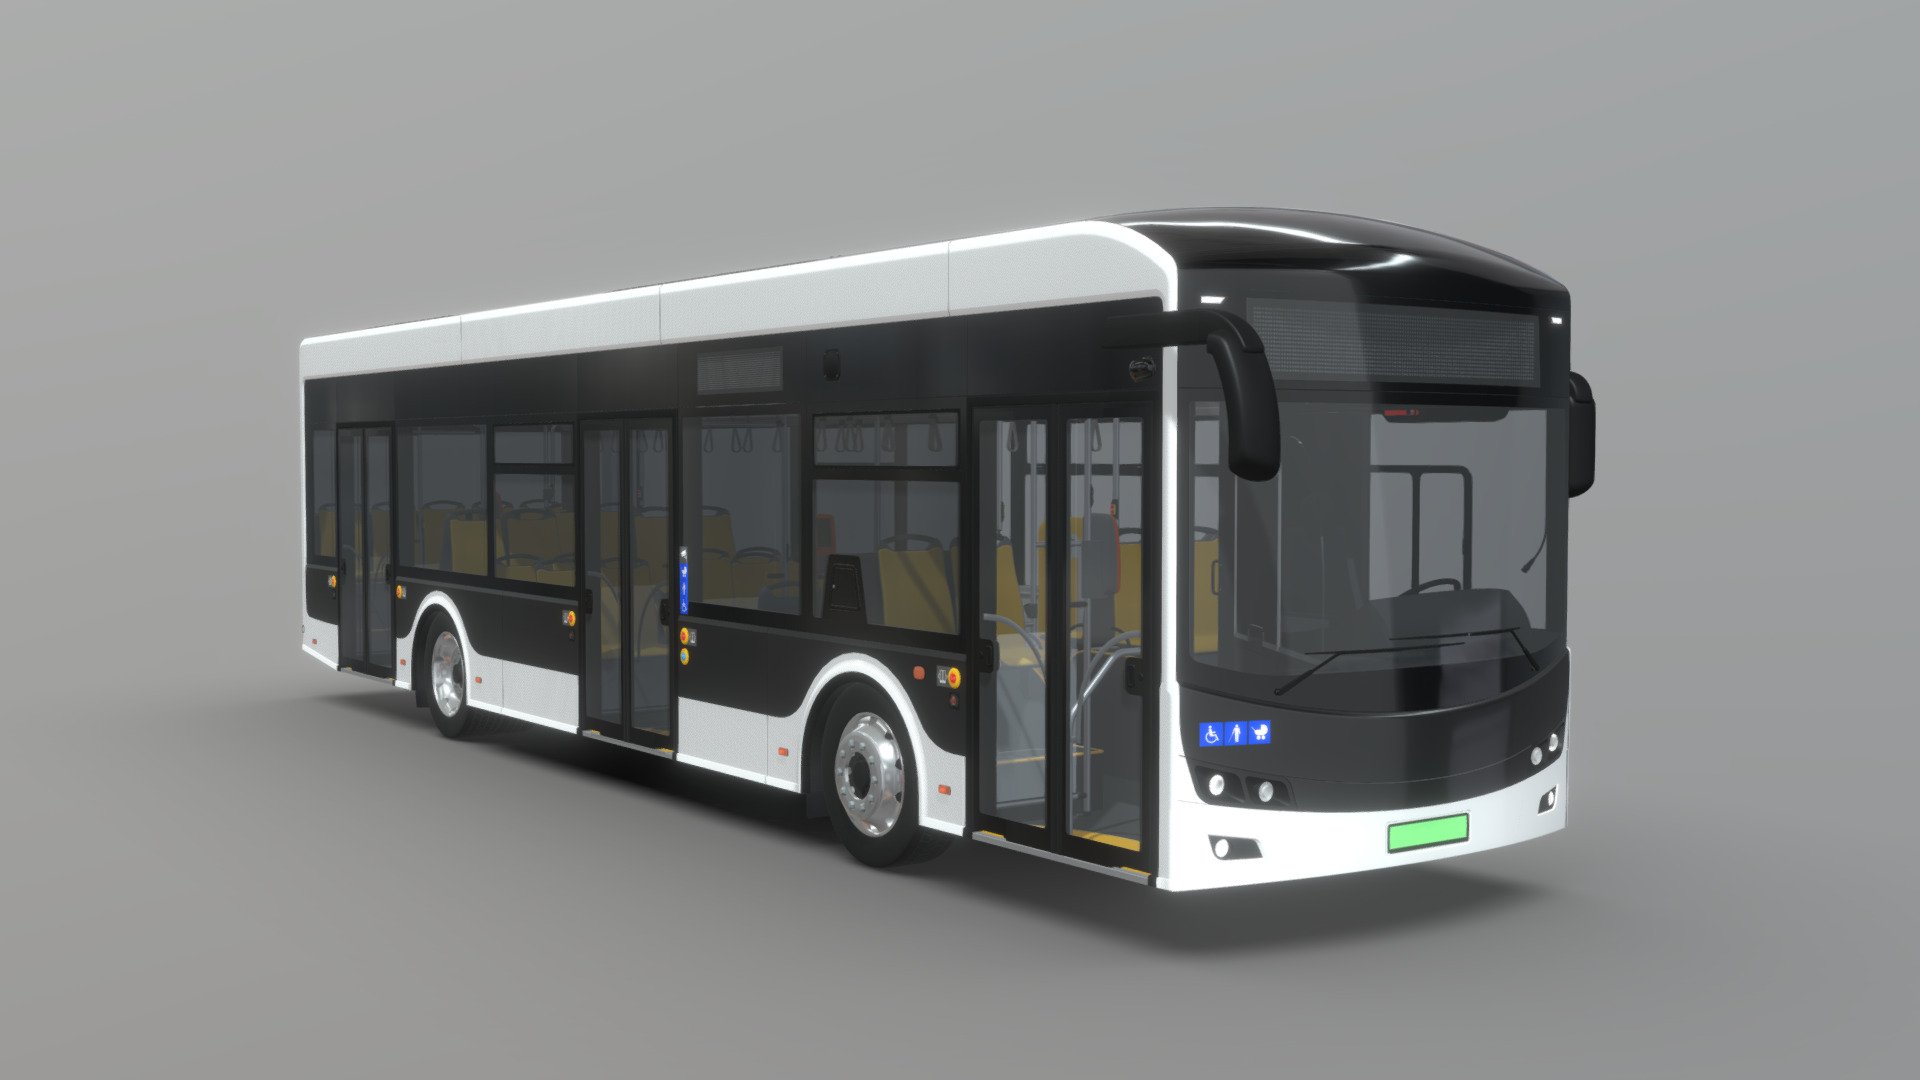 II generation of my low-floor, emission-free, electric city bus. Compared to the previous generation, the new model has undergone a slight lifting of the exterior. The interior has changed as well. By repositioning the engine and moving some of the batteries and other equipment to the roof of the bus, the number of seats was increased from 26 to 33 seats. The length is still 12000mm and the height is 3300mm.
(From the technical point of view, the steering wheel was seperated from the desk and is now a seperate object.) - Electric City Bus II Gen [Full Interior] - Buy Royalty Free 3D model by KolorowyAnanas 3d model